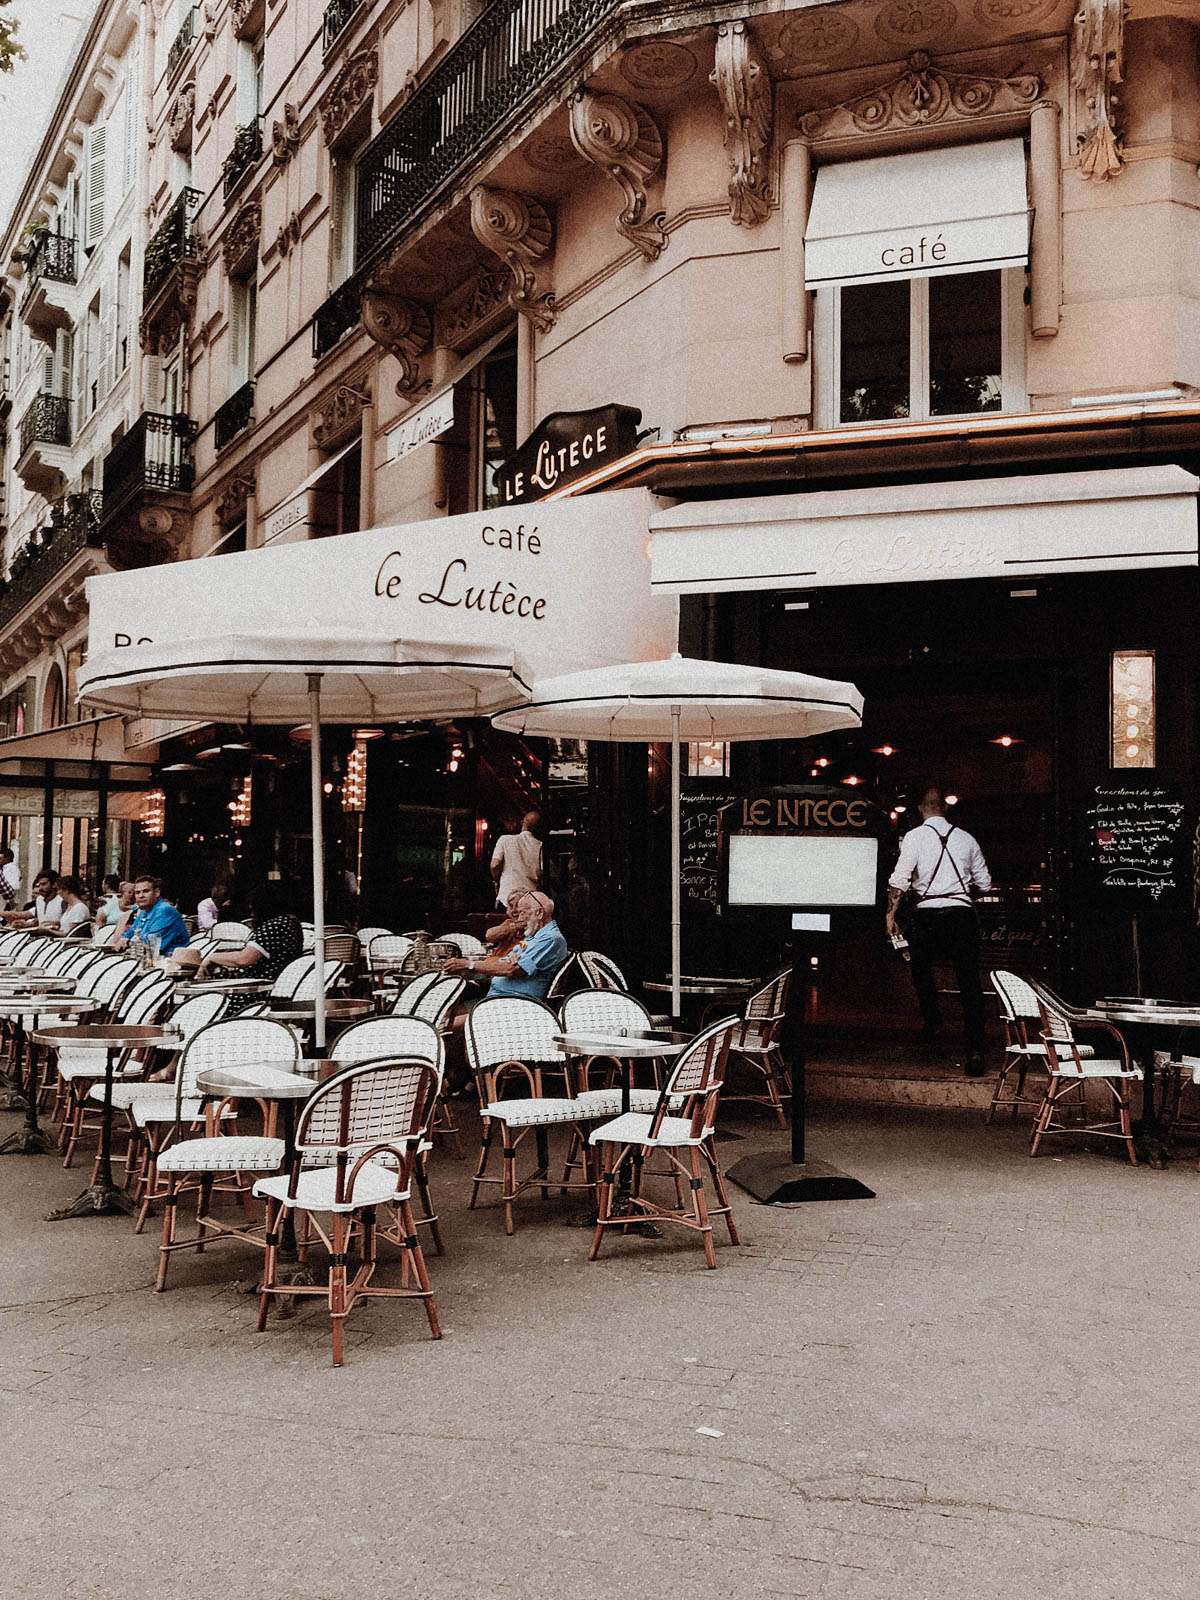 Paris France Travel Guide - Cafe Le Lutece, European Architecture and Buildings / RG Daily Blog